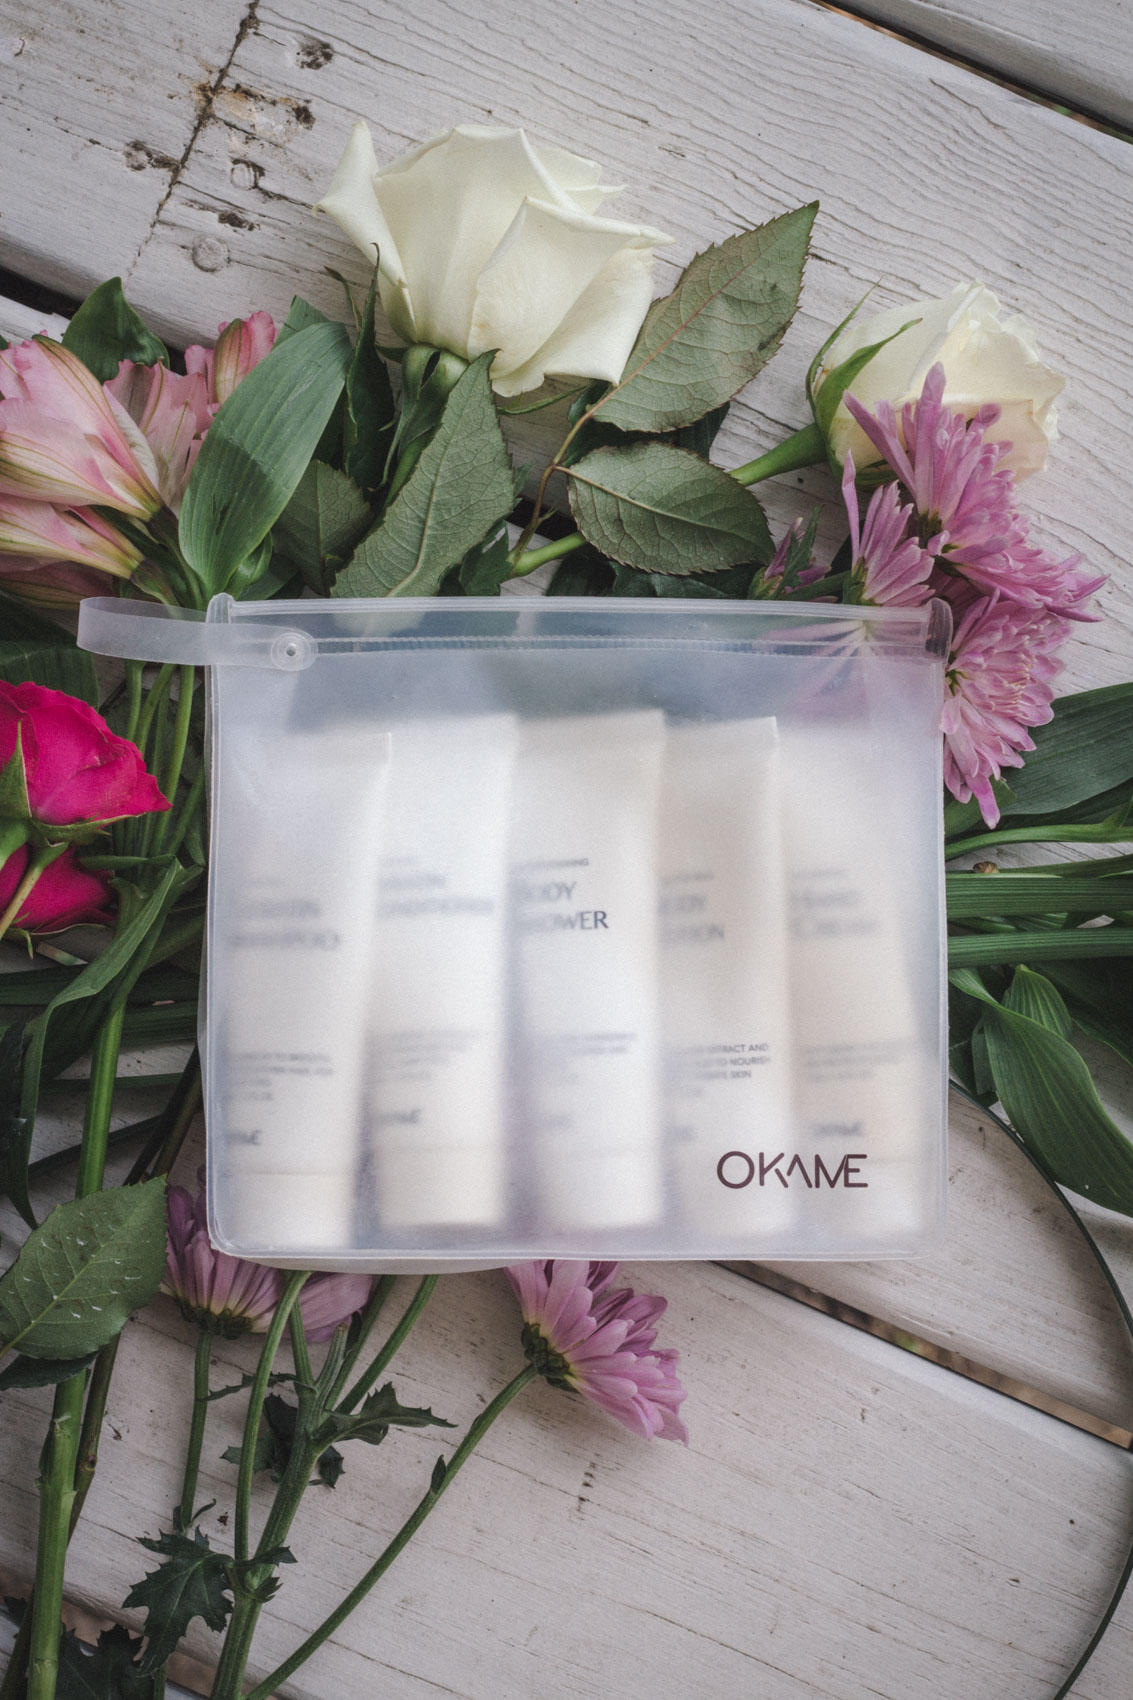 I was recently introduced to Okame Skincare (which means happy mask in Japanese) - a newly launched Asian beauty brand focused on simple, nature inspired products with non-toxic ingredients that are effective for skin types across the board. I've been loving their travel kit [c/o] for trying out all the products. I've used a bit of each to test them out, but I am trying to save the kit for my trip in August so that I have quality, travel sized products to take with me - but it's hard because I want to keep using them all now! I'm especially obsessed with the Keratin Shampoo and Conditioner because they make my hair feel healthy without being weighed down. 